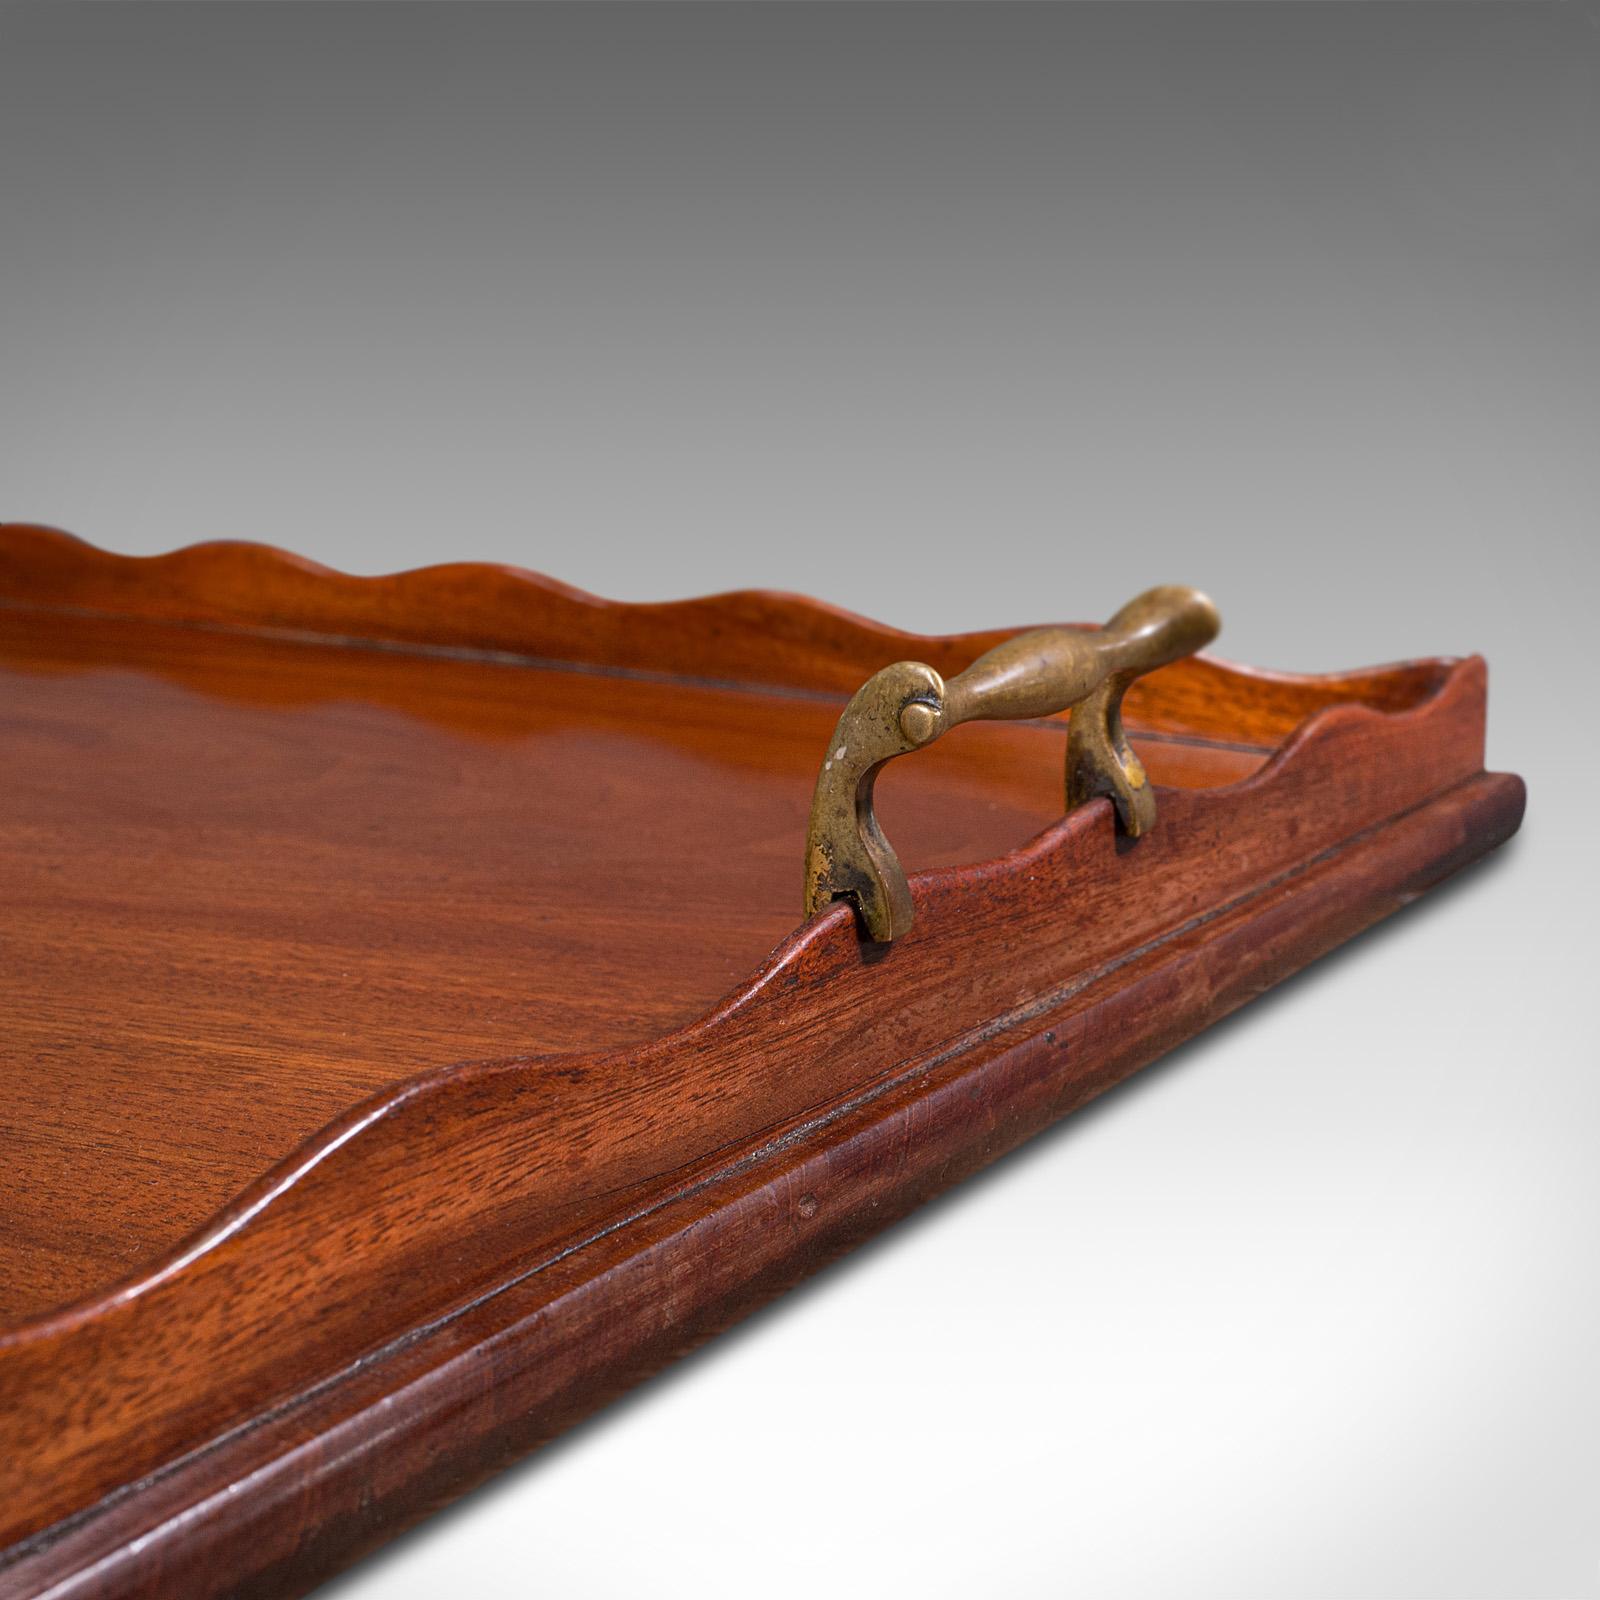 Wood Antique Serving Tray, English, Breakfast, Afternoon Tea, Victorian, Circa 1870